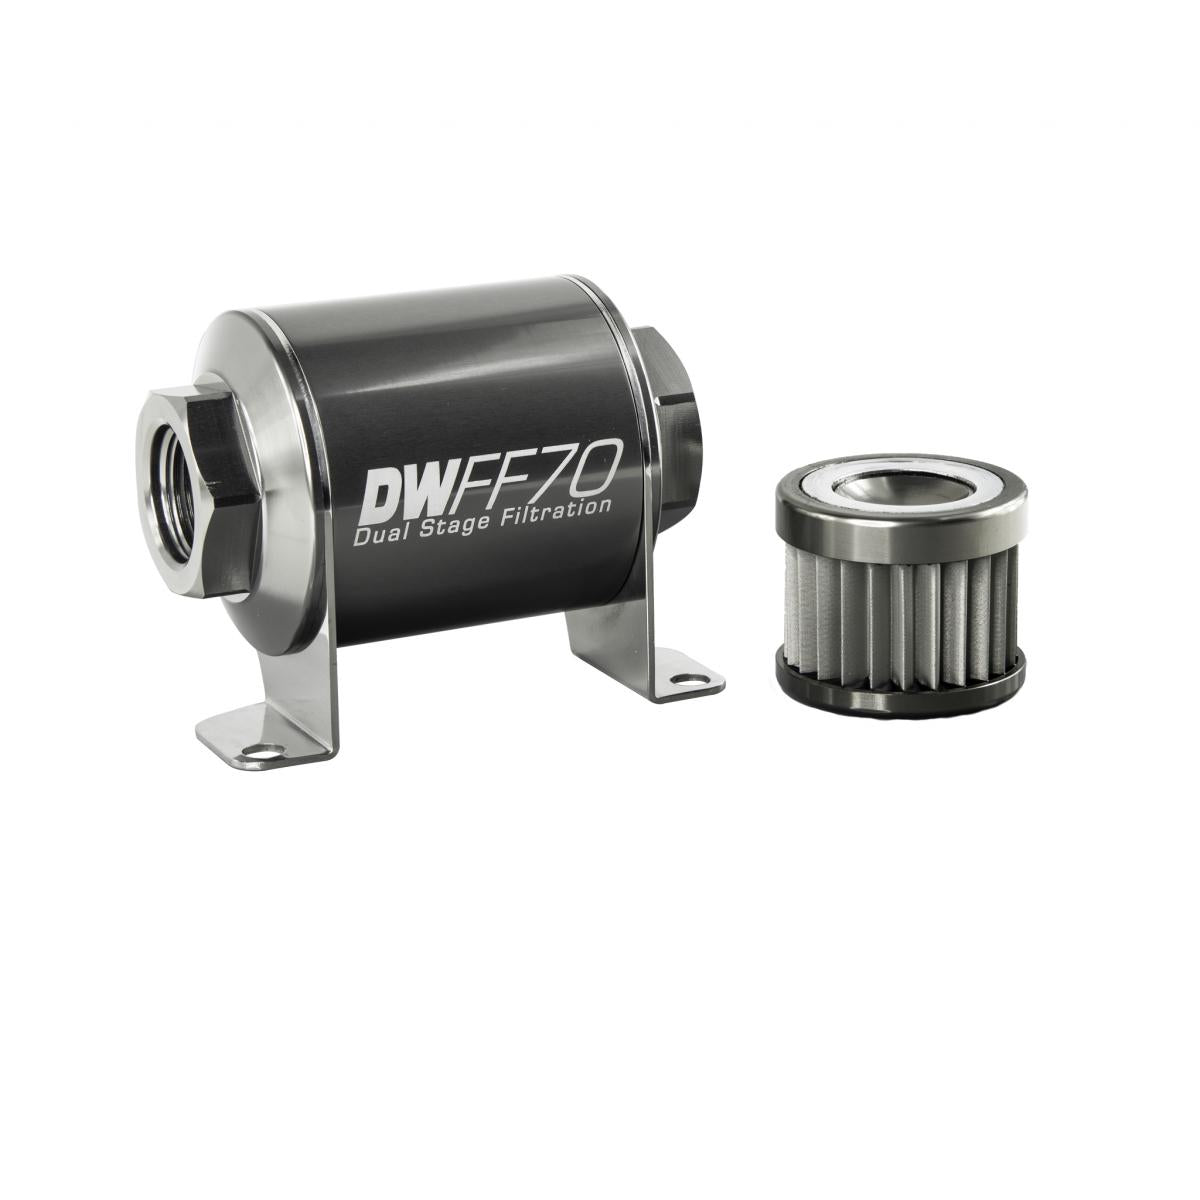 DEATSCHWERKS 8-03-070-010K In-line fuel filter element and housing kit, stainless steel 10 micron,-8 Photo-0 